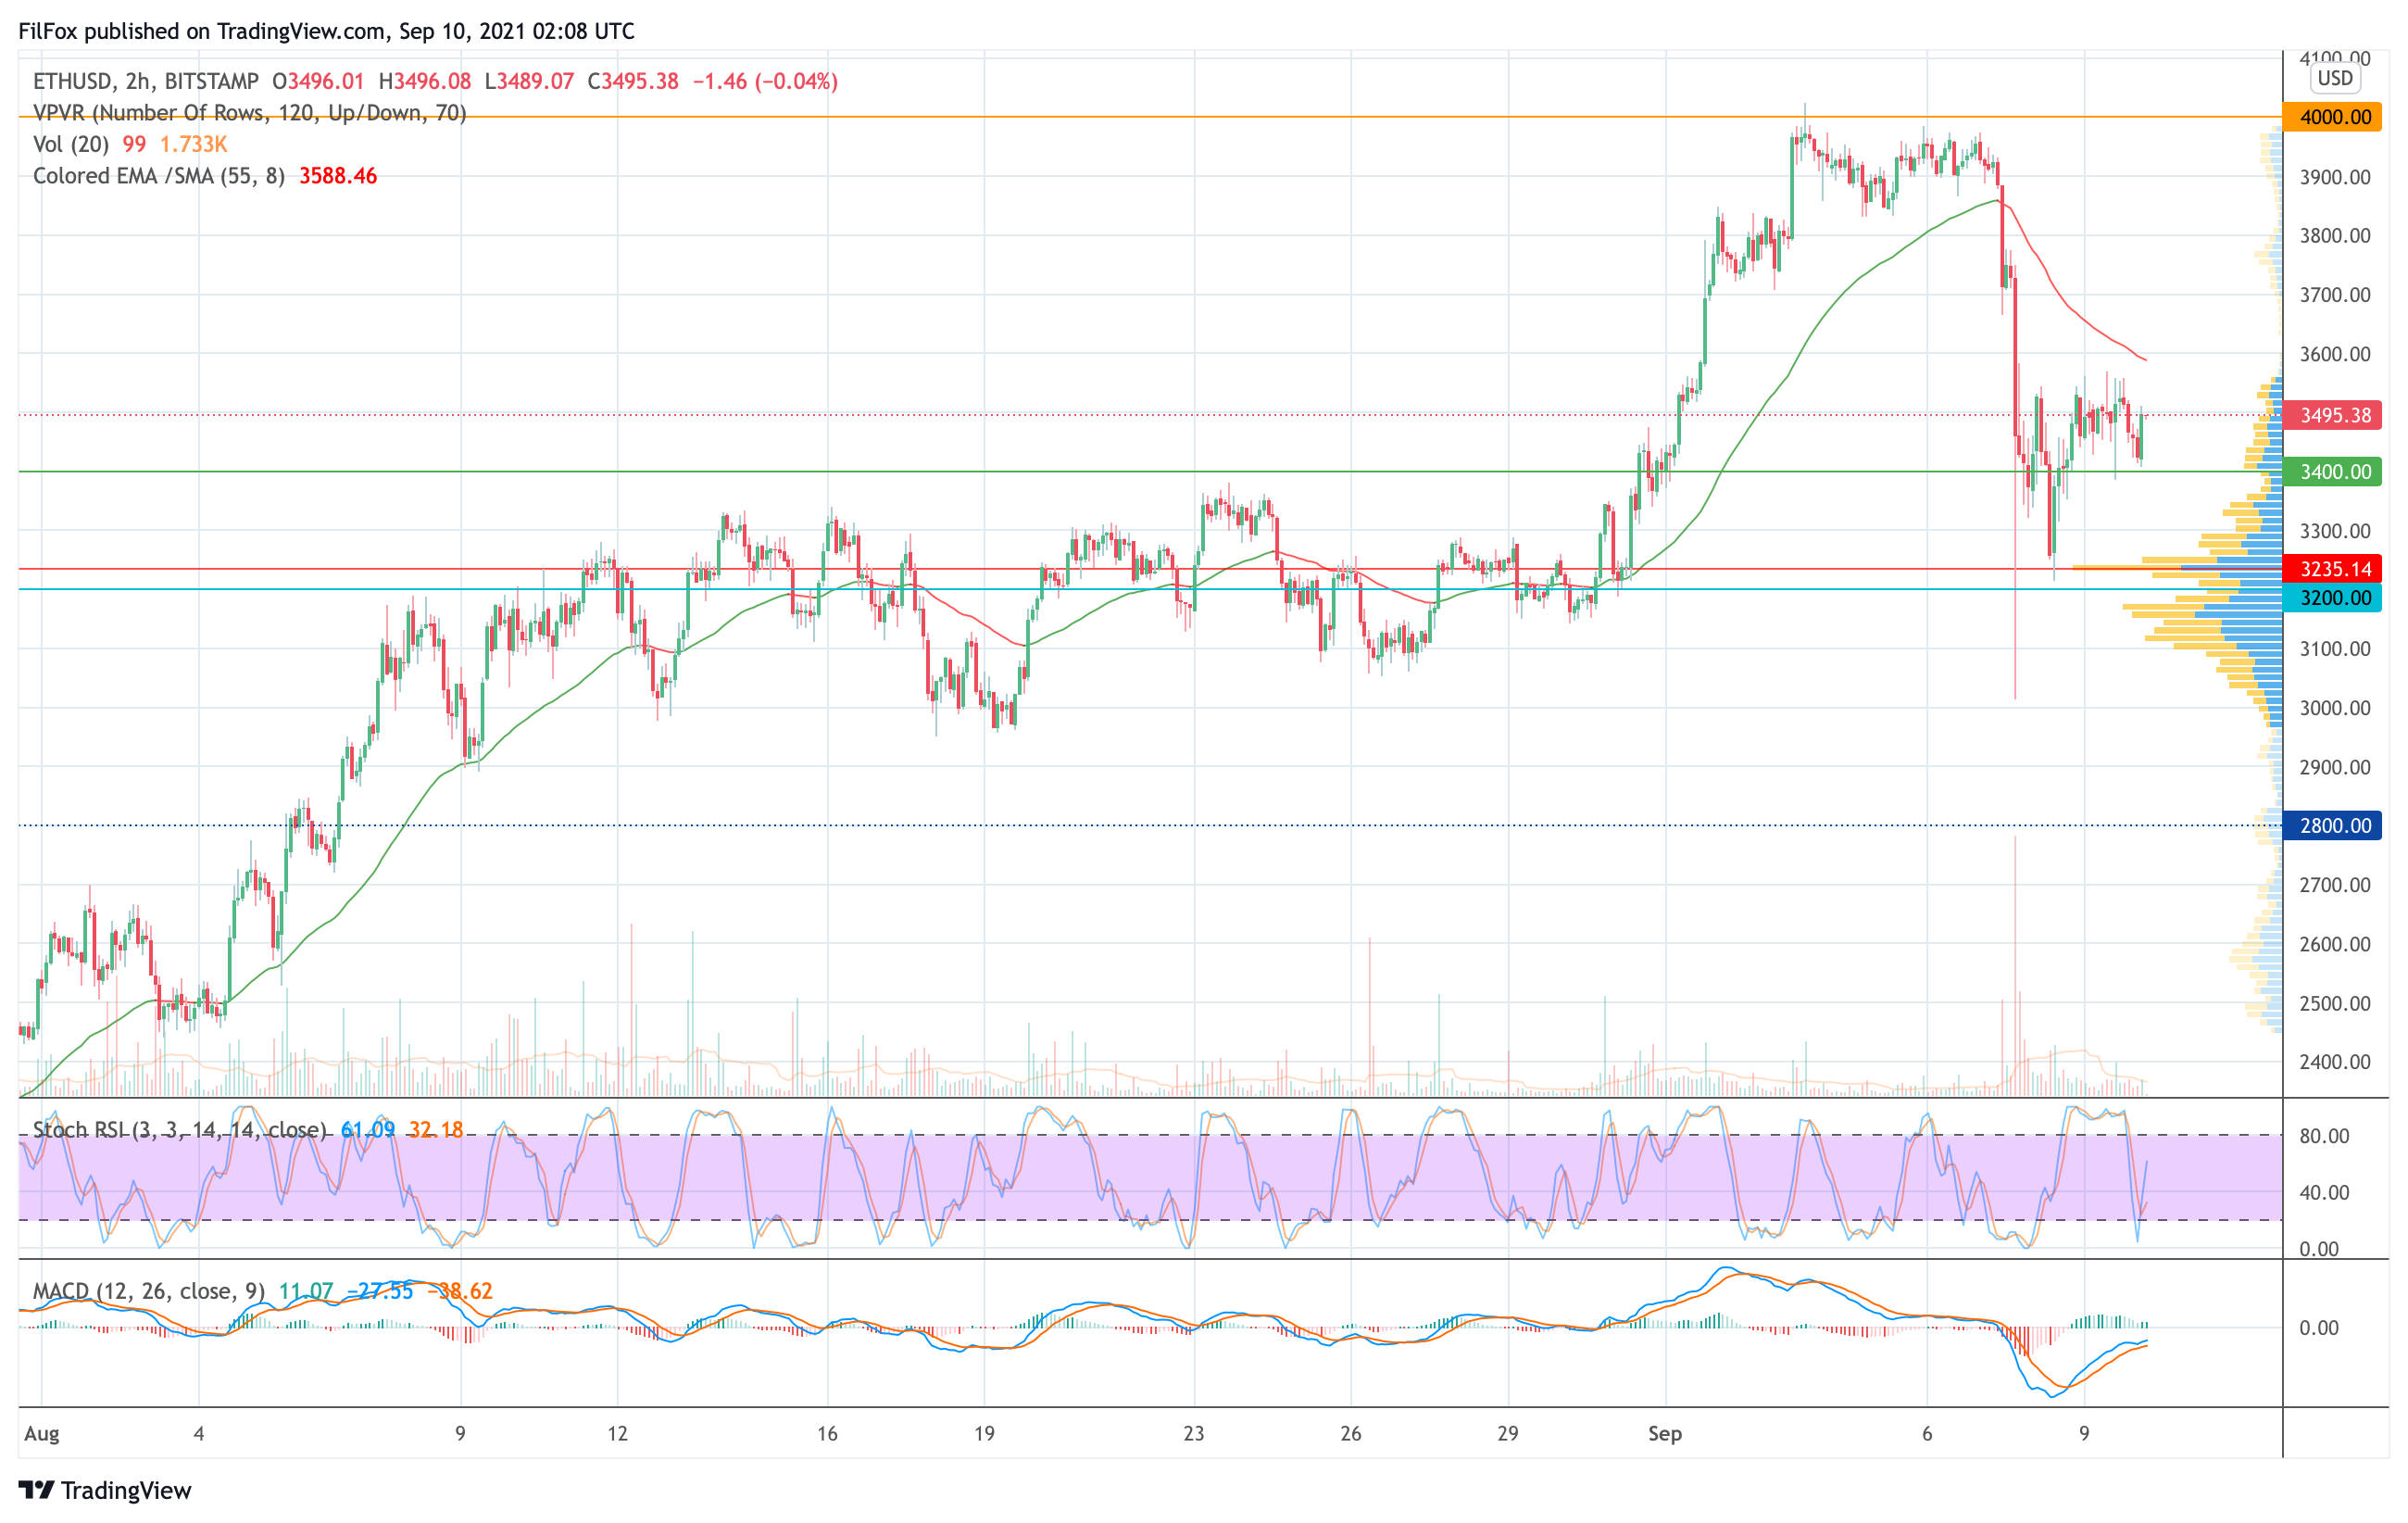 Analysis of the prices of Bitcoin, Ethereum, XRP for 09/10/2021